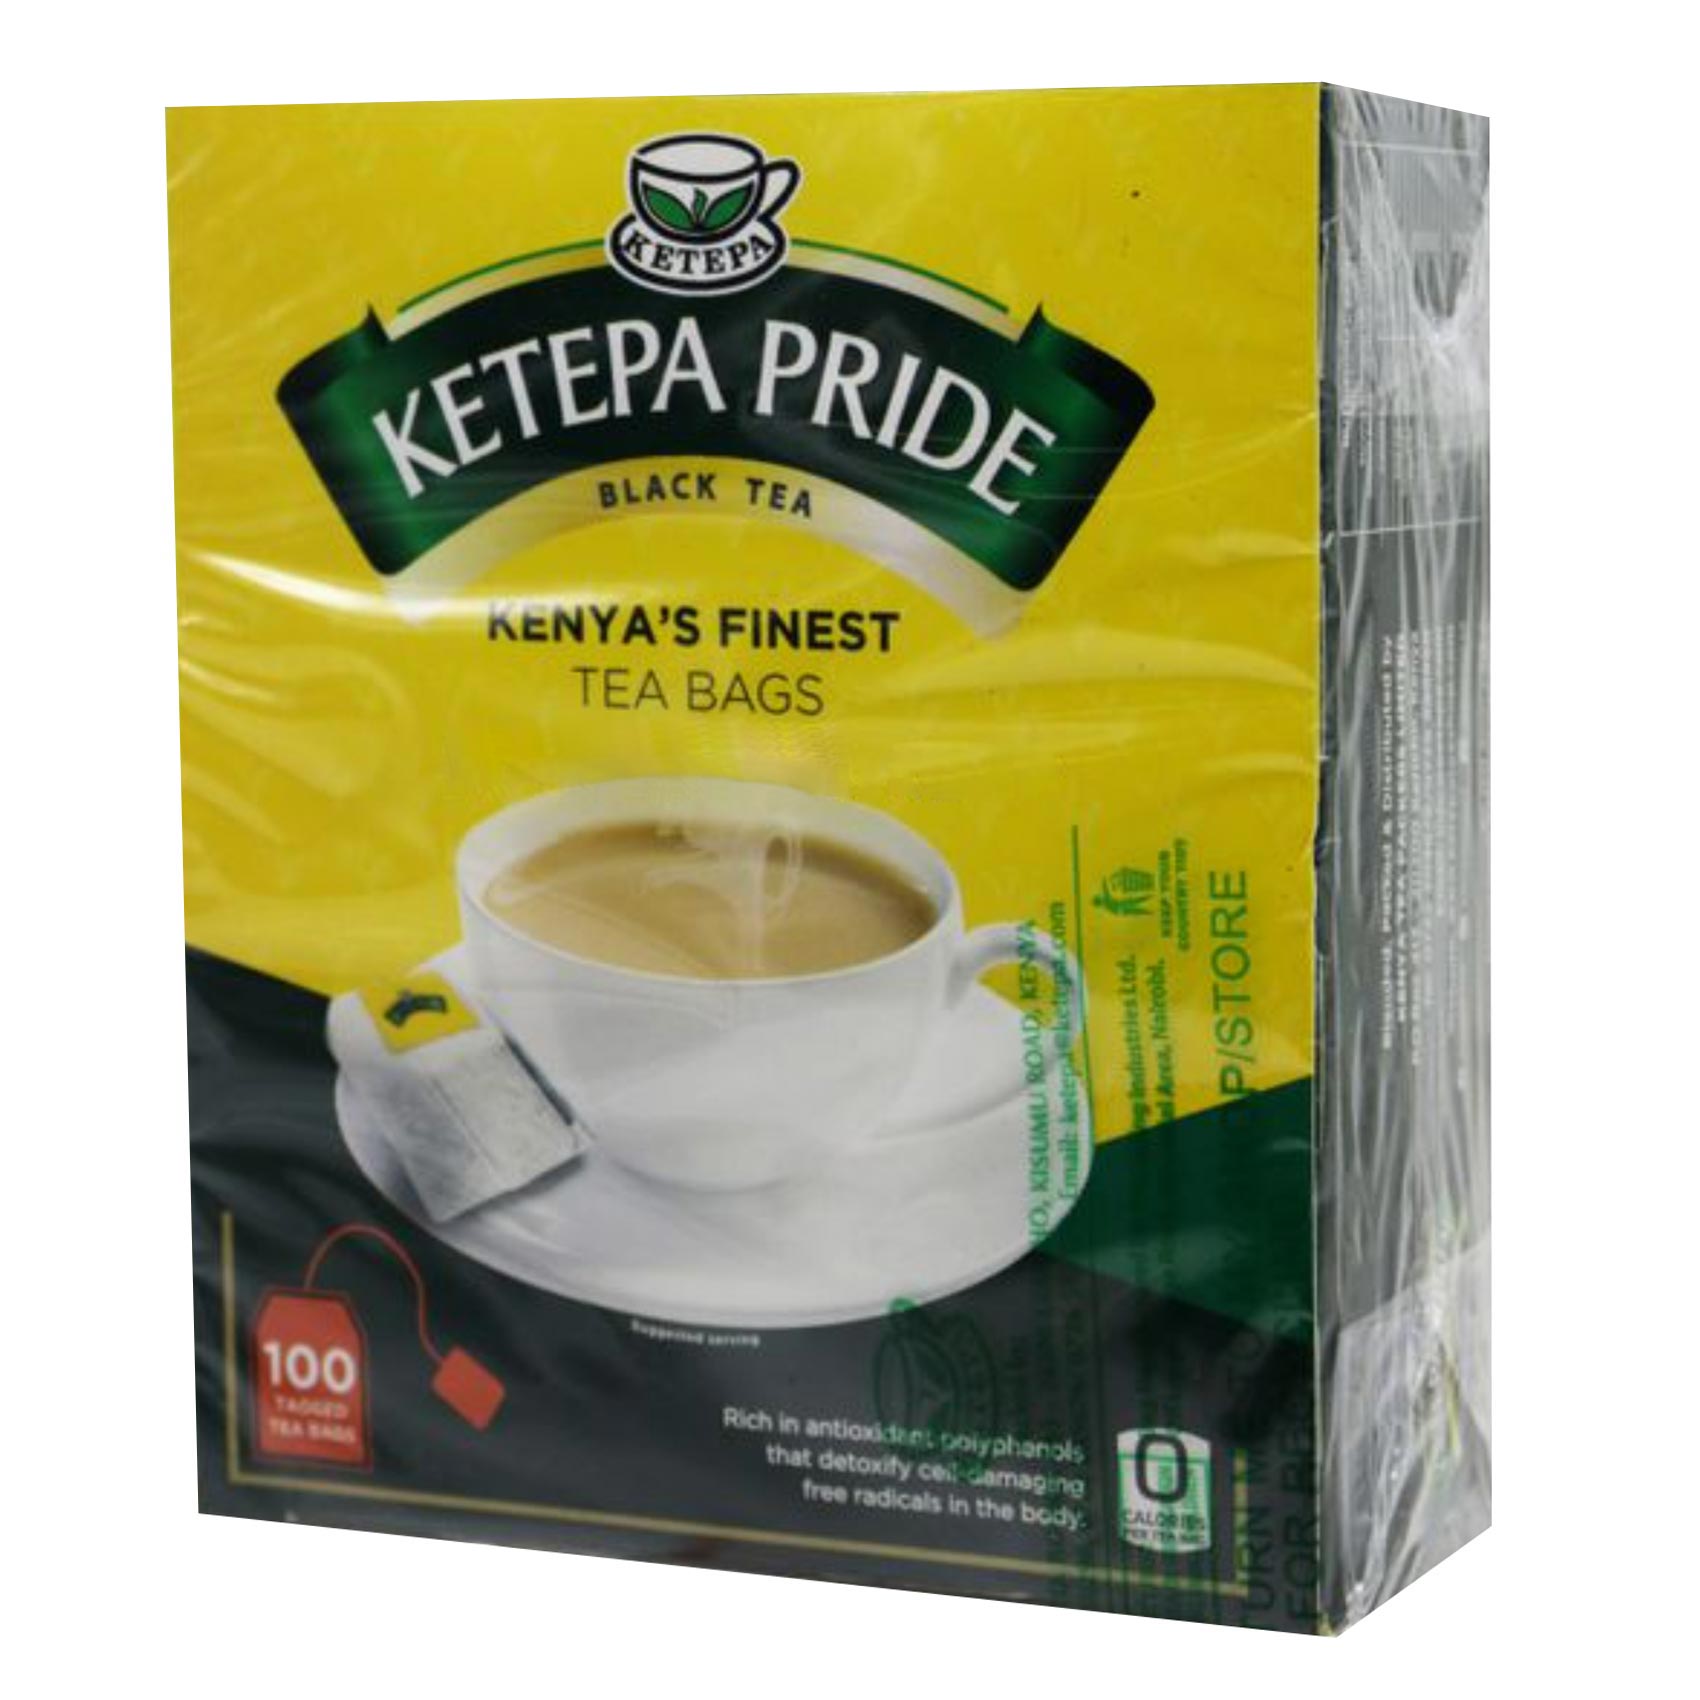 Ketepa Pride Tagged Tea Bags 2g x 100 Pieces